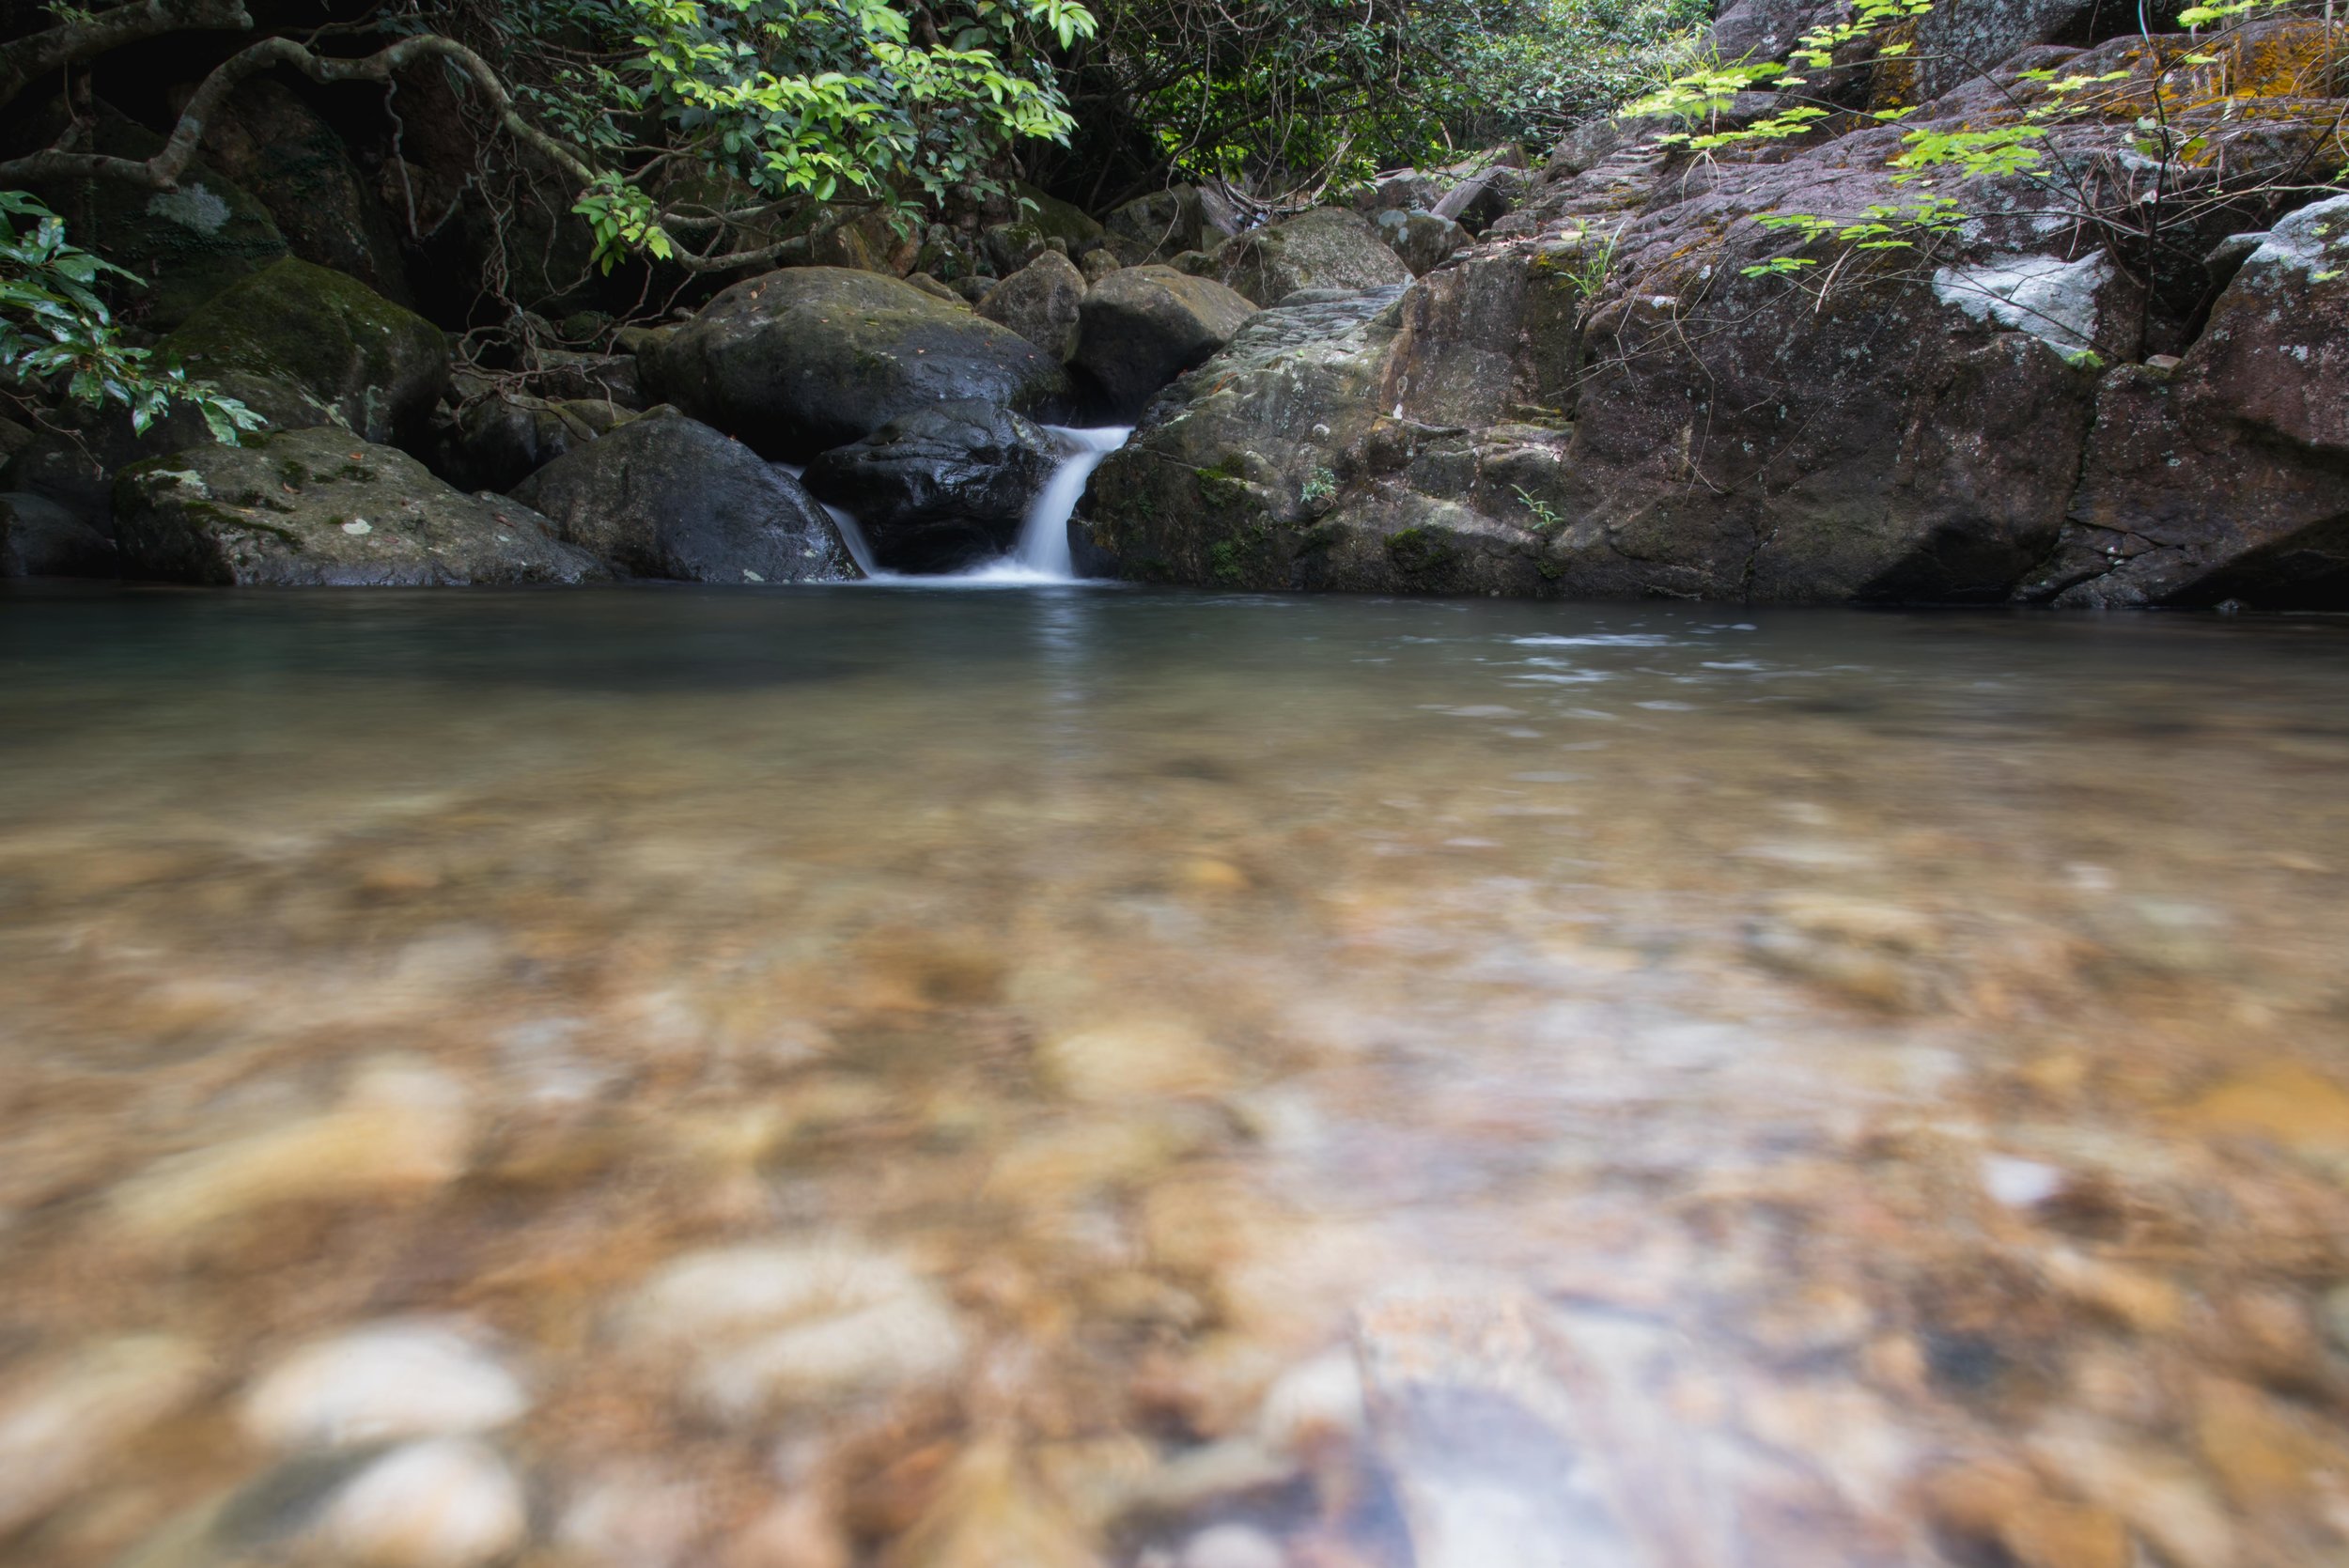  A hidden oasis in Hong Kong. Perfect for cooling off hot feet and faces in the summer humidity. 